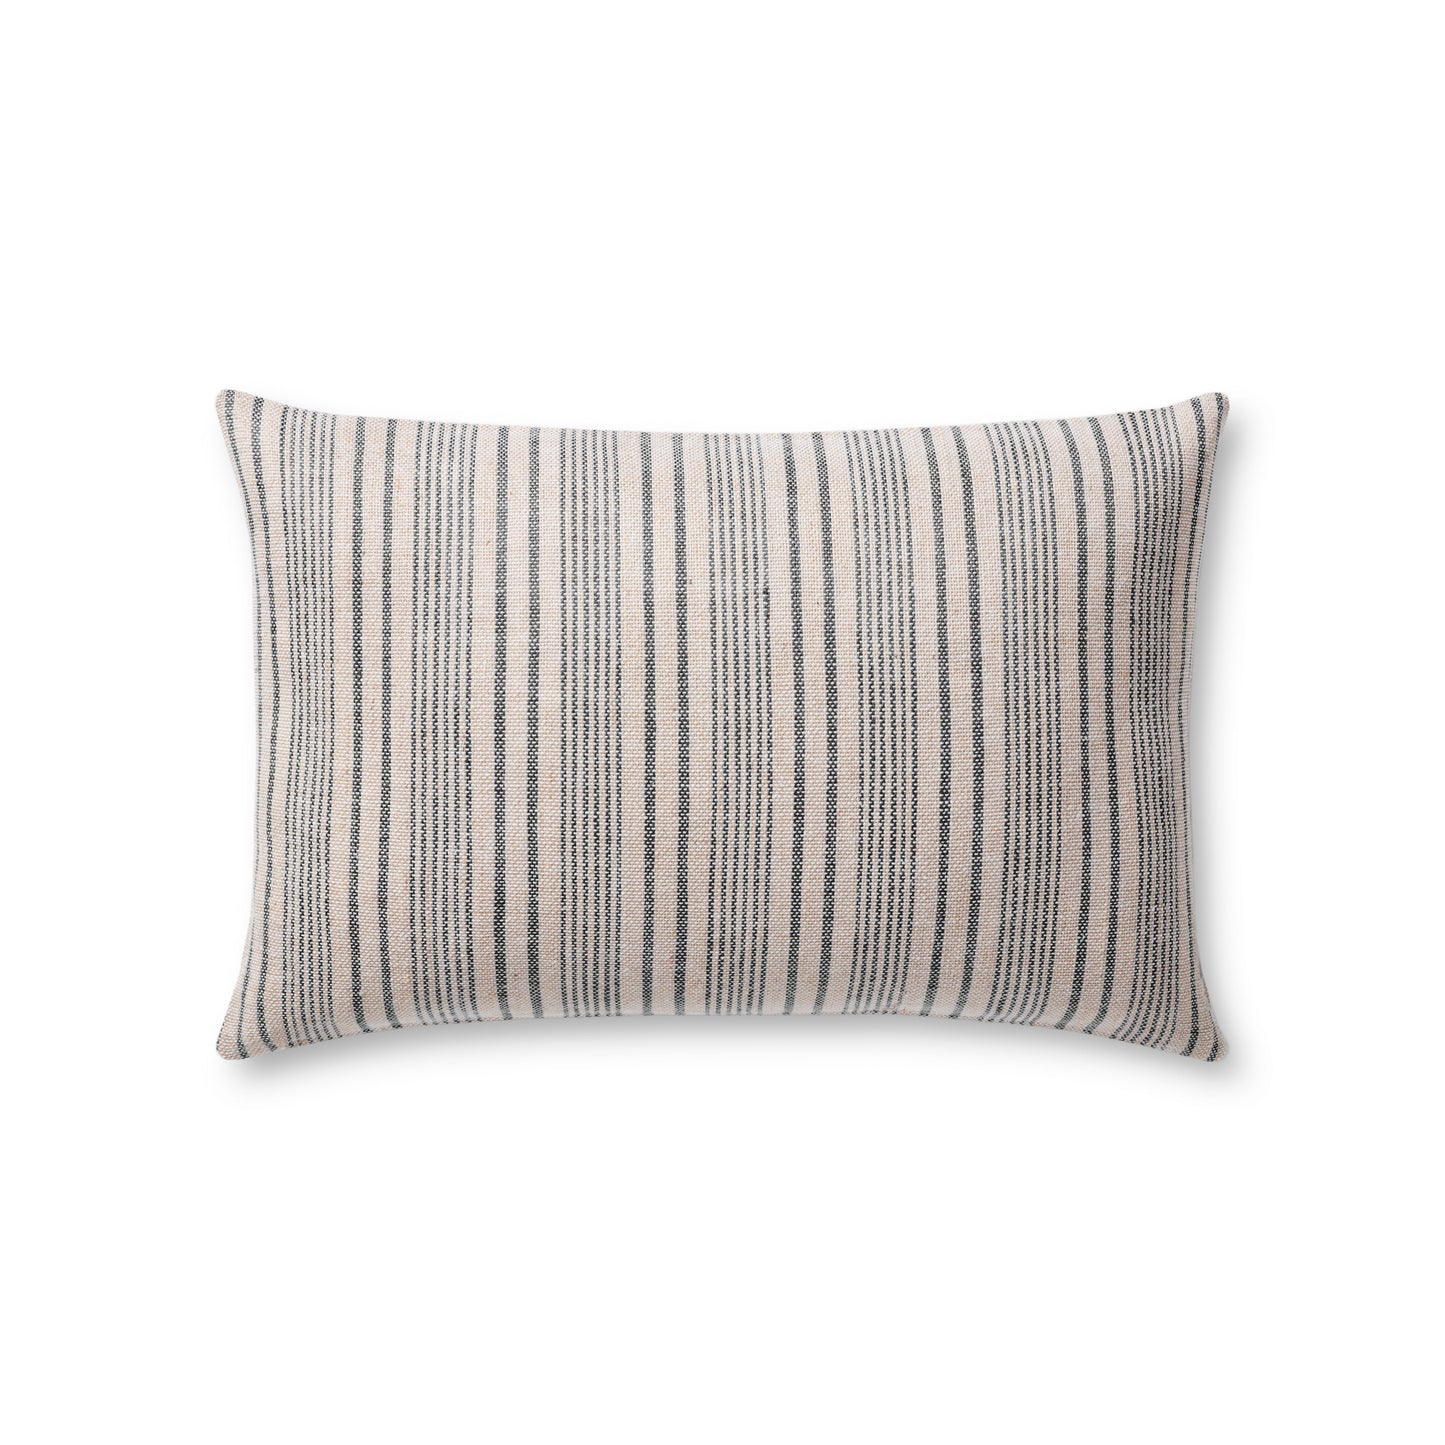 Elaine PMH0031 Cotton Indoor Pillow from Magnolia Home by Joanna Gaines x Loloi